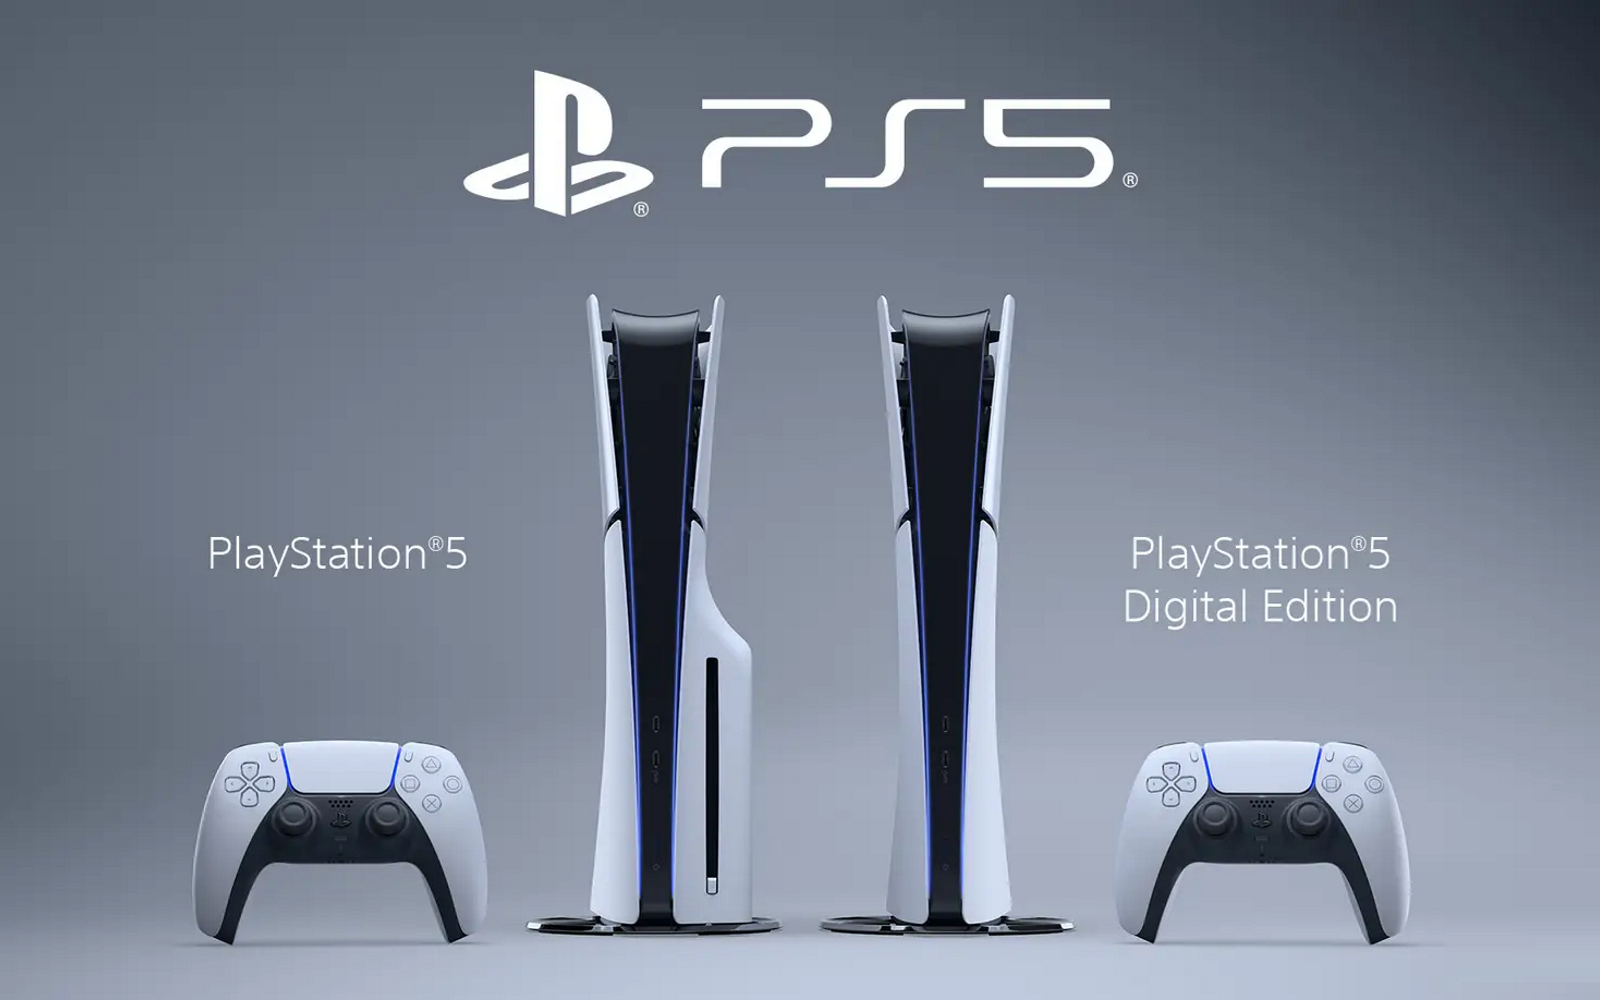 New Slimmer PlayStation 5 Models Announced. Releasing This Winter